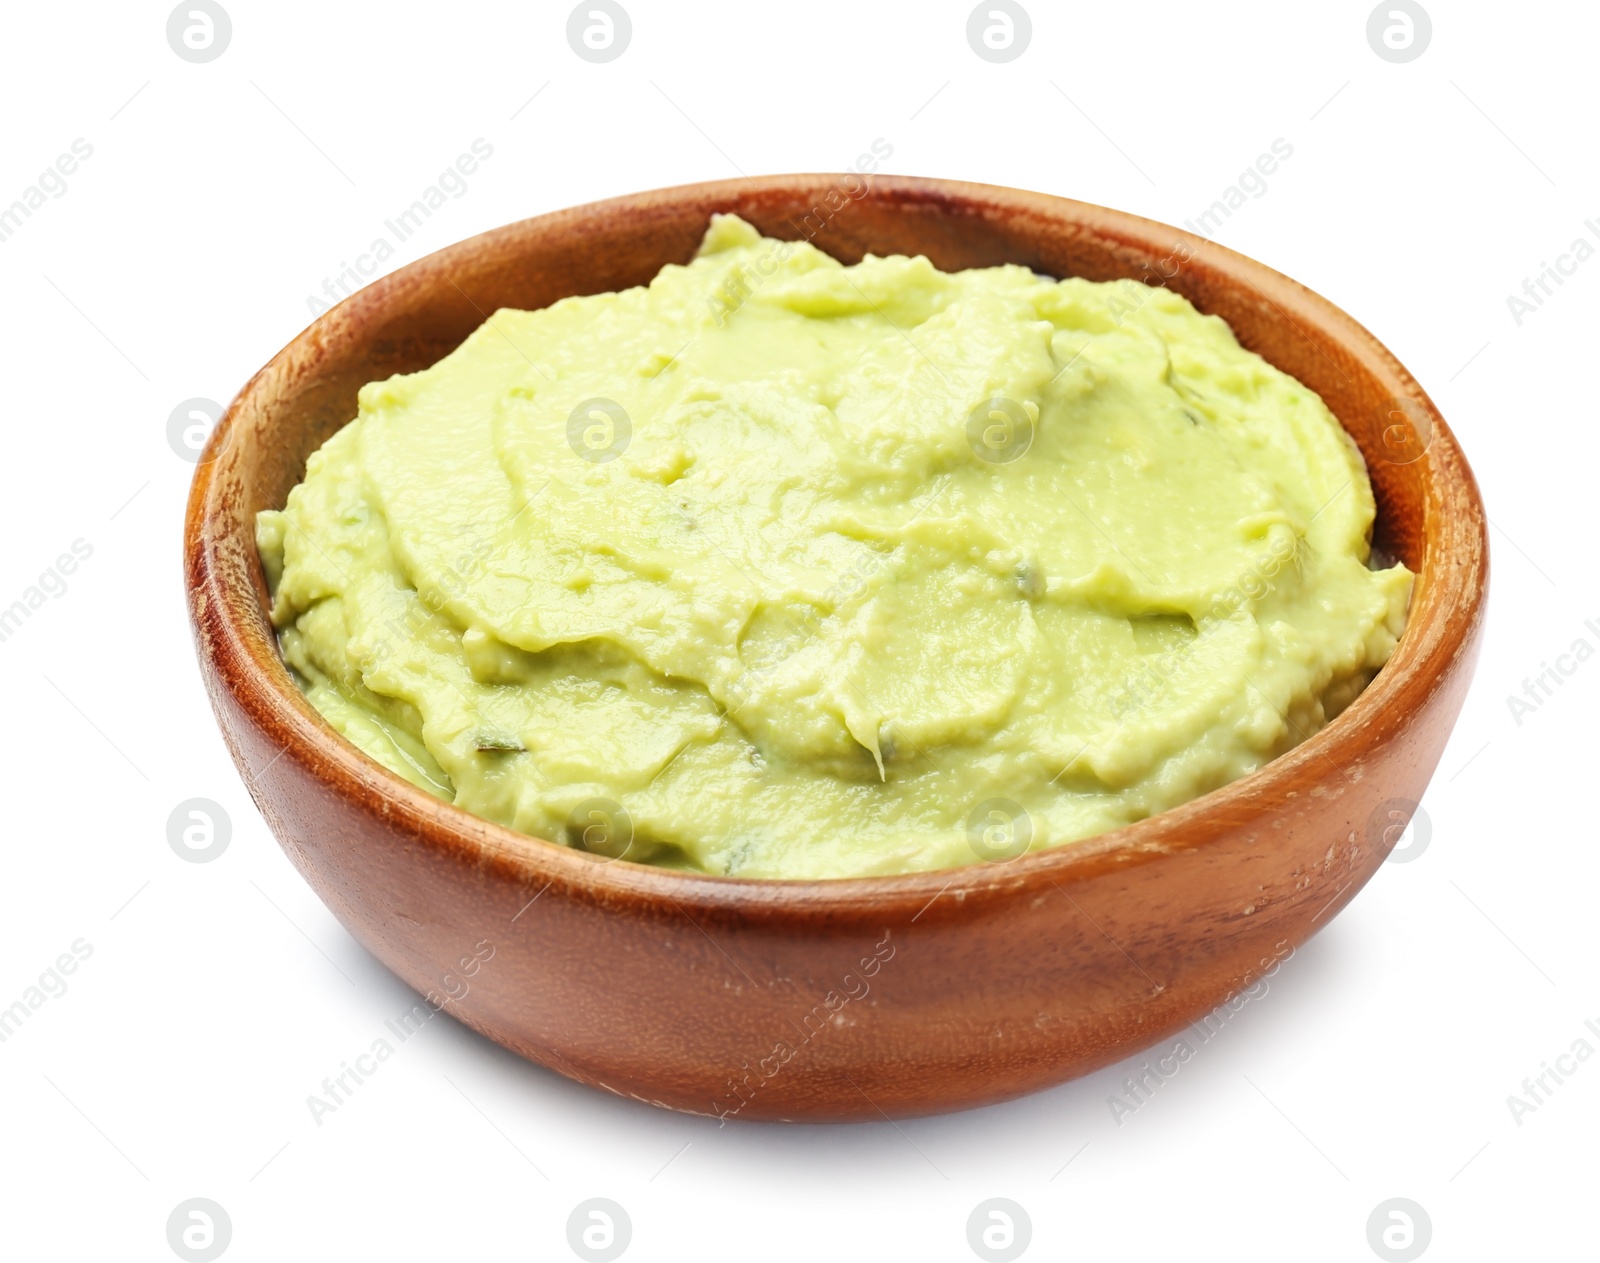 Photo of Bowl with guacamole made of ripe avocados on white background